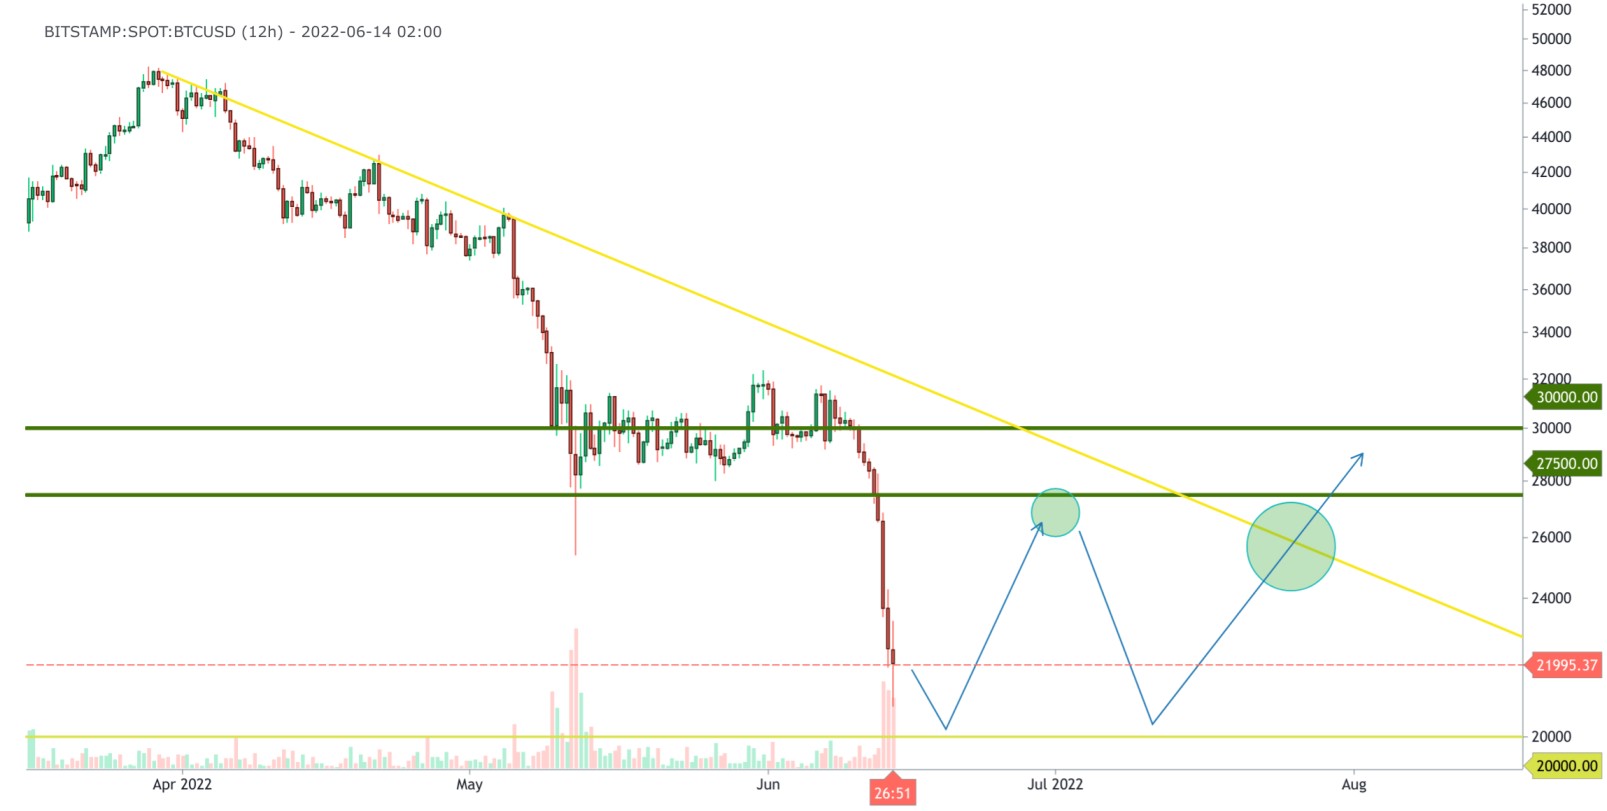 BTC/USD 12-hours chart showing the potential recovery of Bitcoin crash